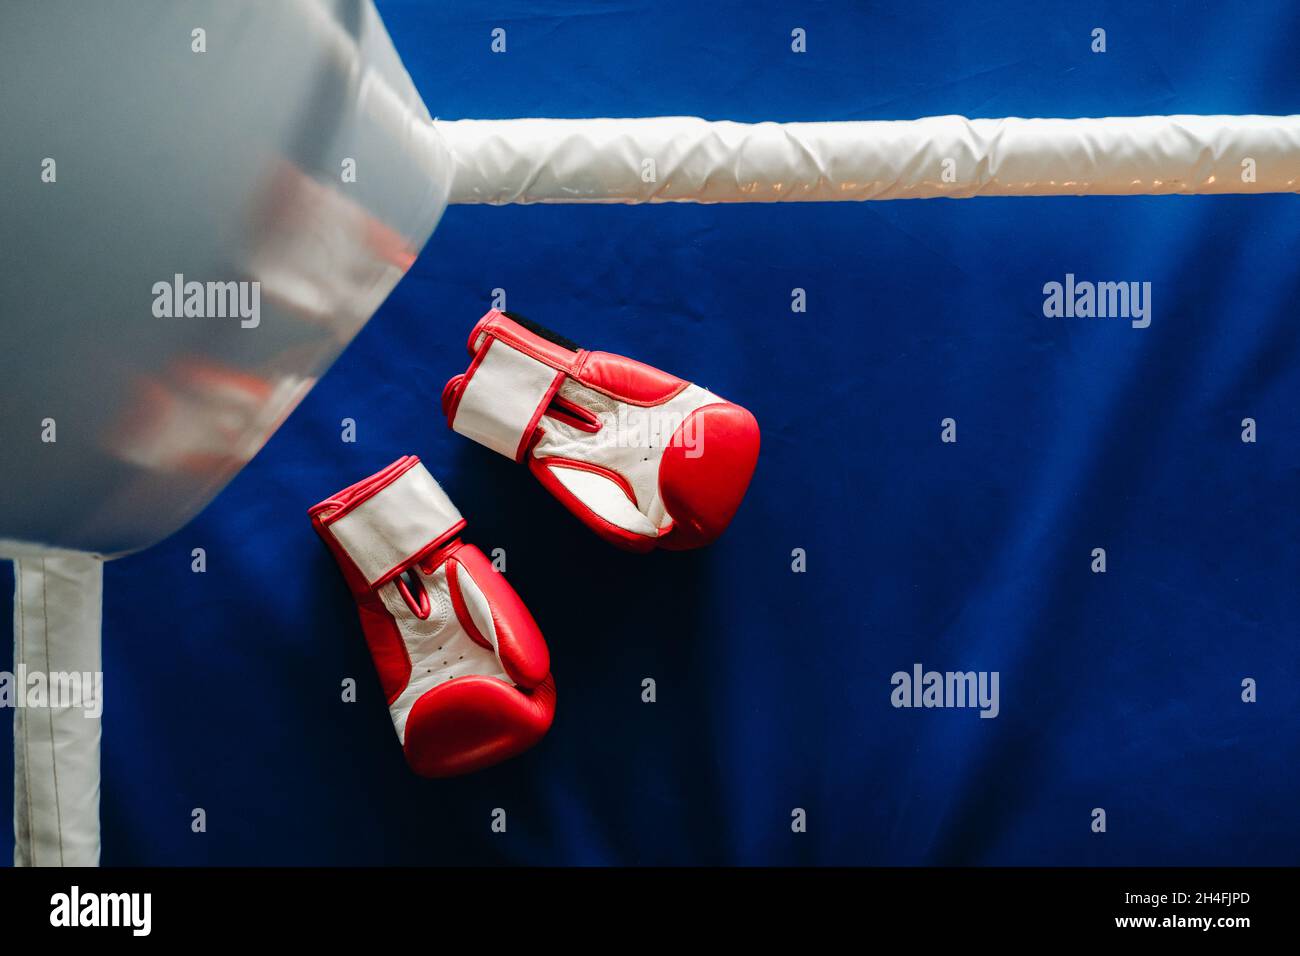 Close-up of red boxing gloves on the floor of a blue boxing ring. Stock Photo